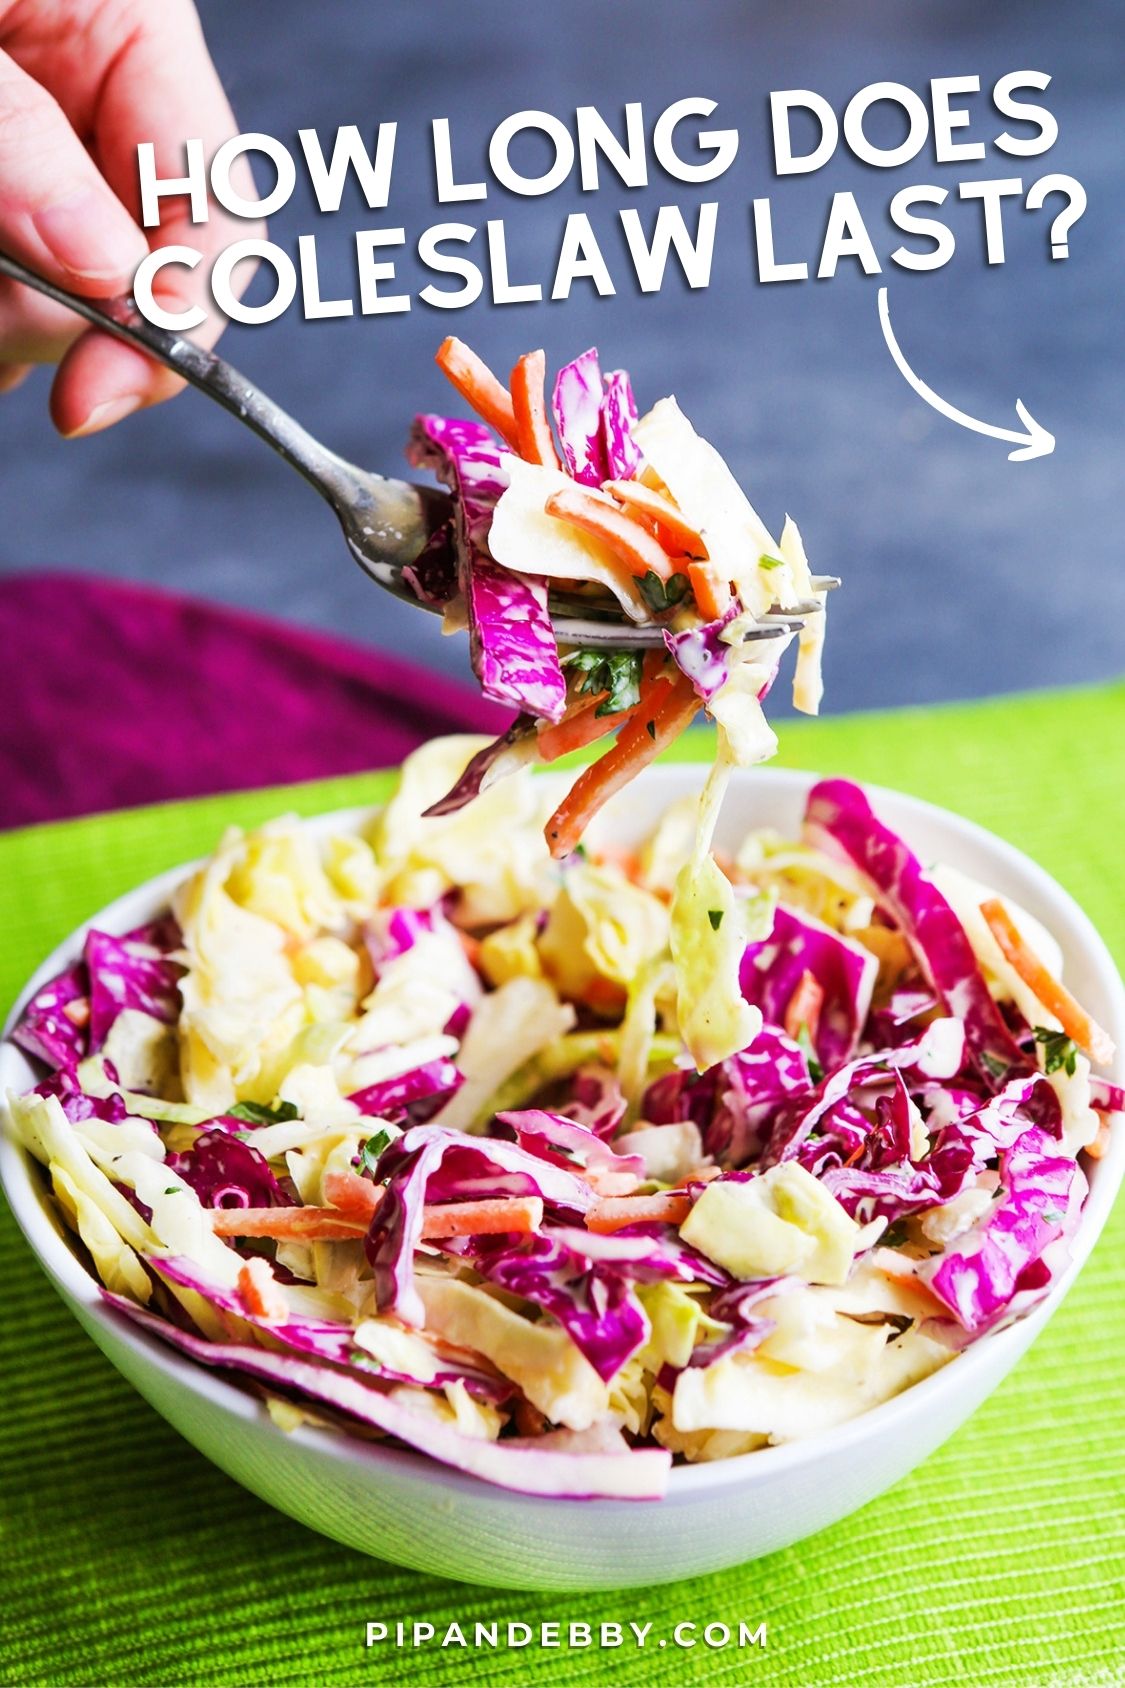 Photo of a bowl of coleslaw with text overlay reading, "How long does coleslaw last?"